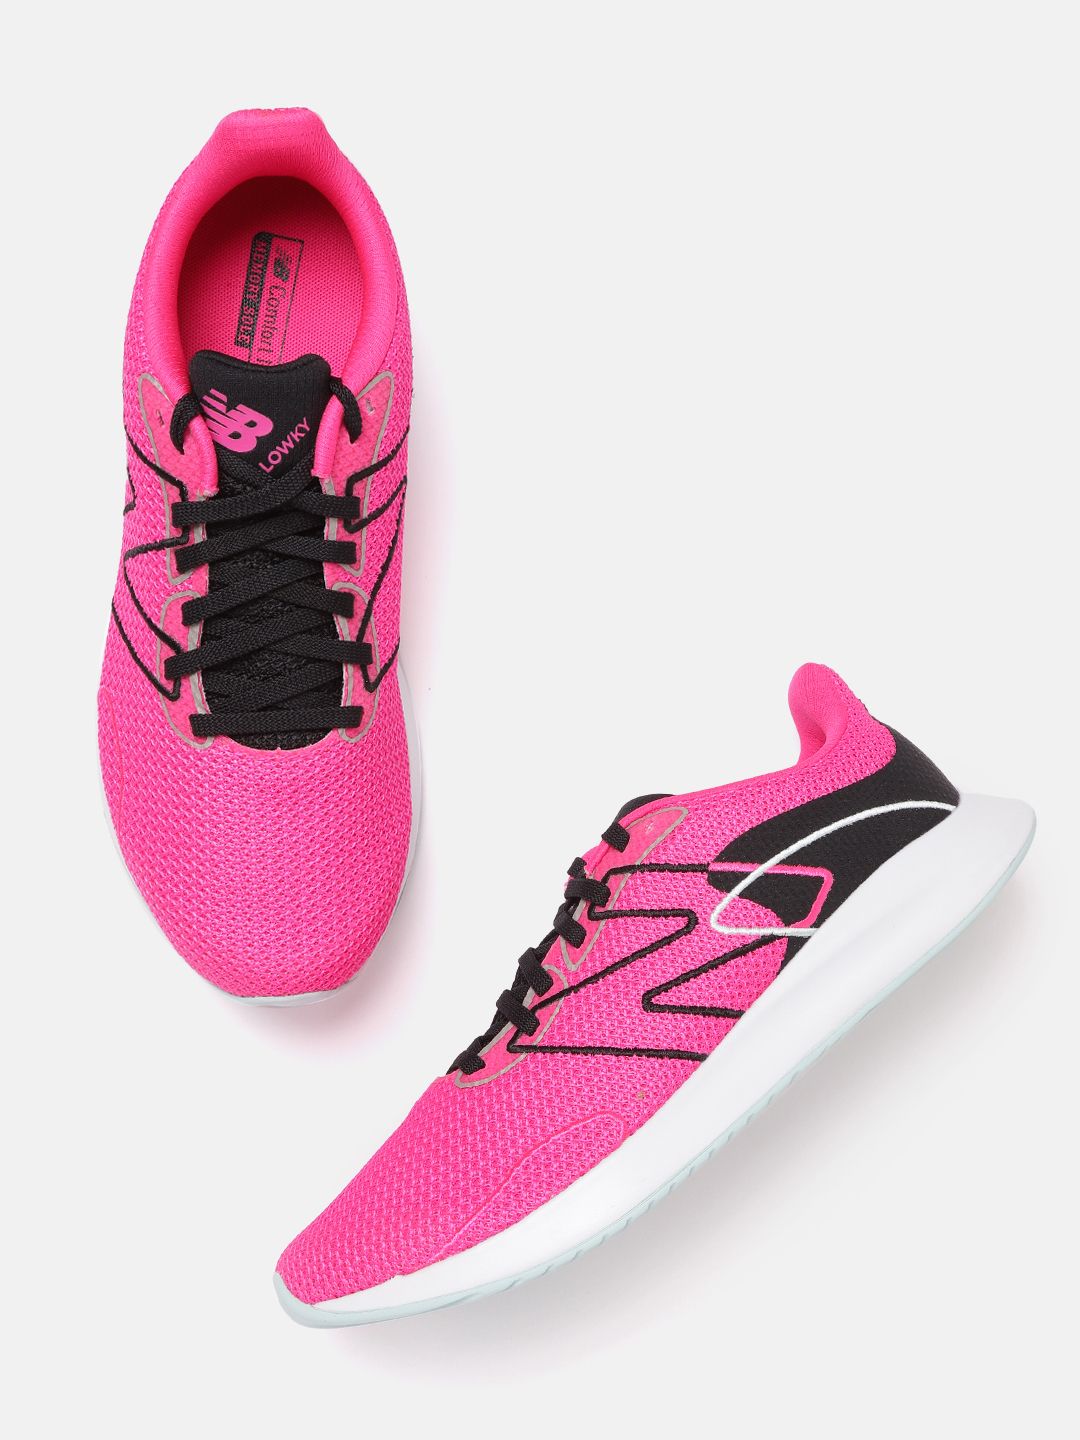 New Balance Women Pink Woven Design Running Shoes Price in India